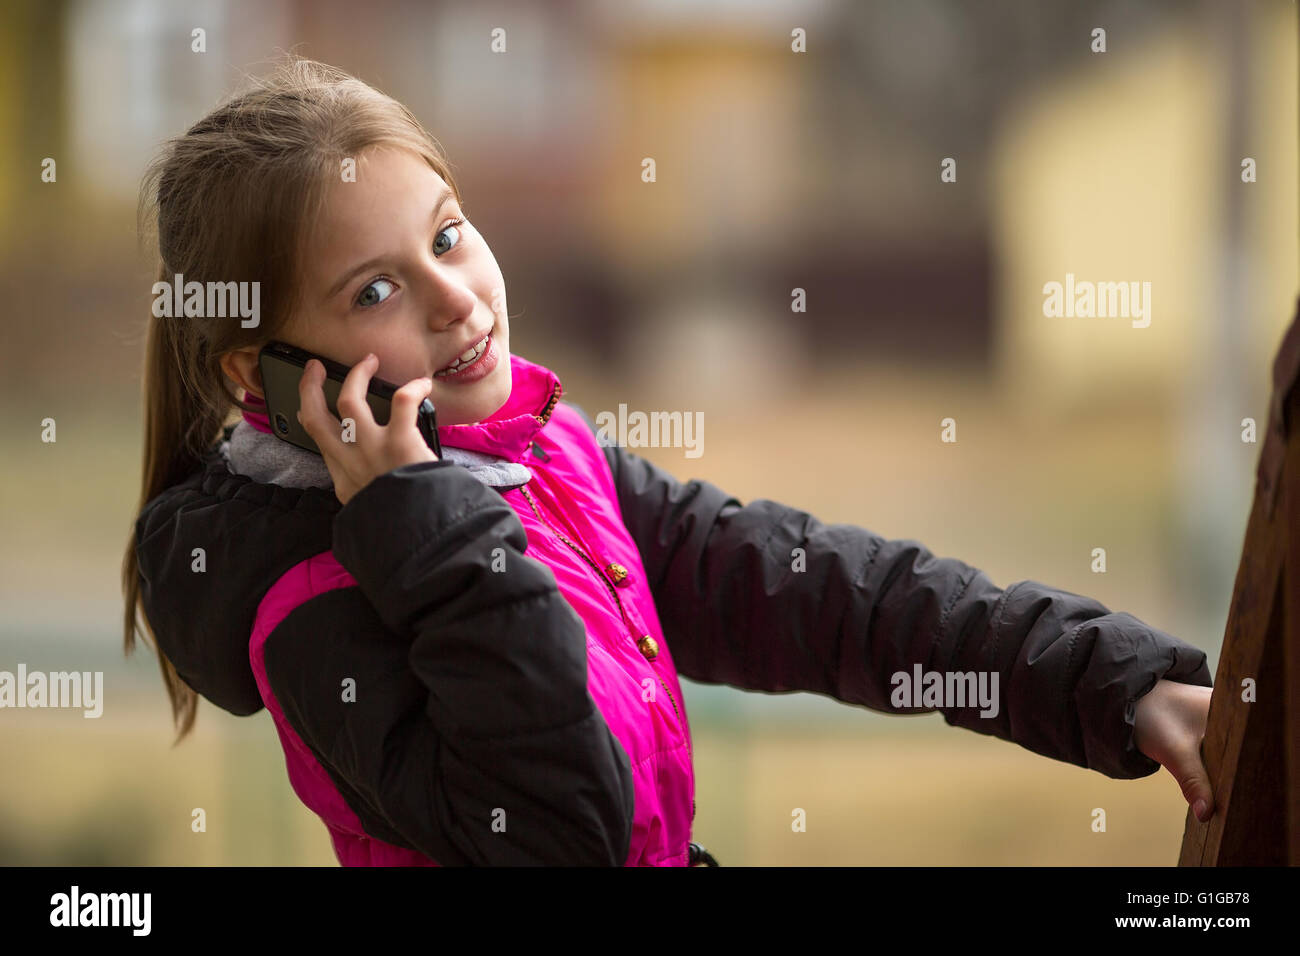 Cheerful little girl talking on a mobile phone call. Stock Photo